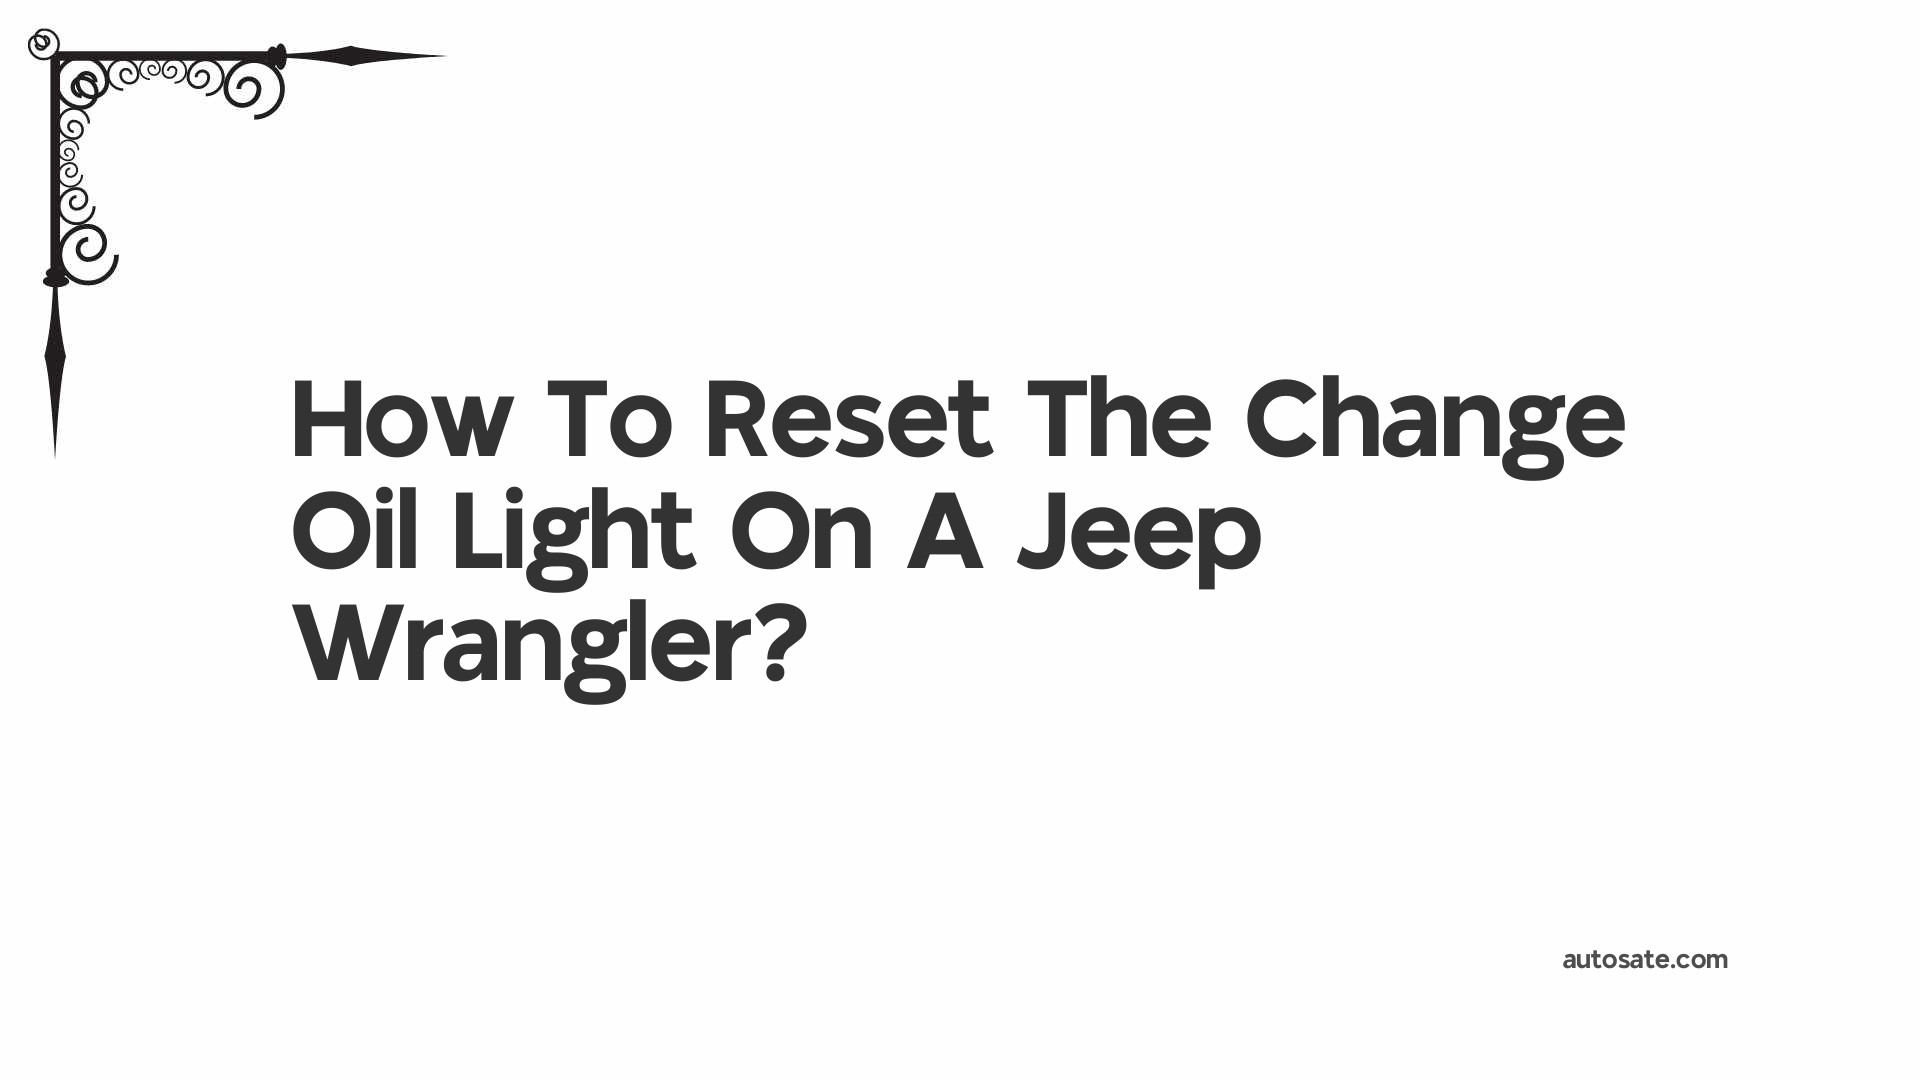 How To Reset The Change Oil Light On A Jeep Wrangler?